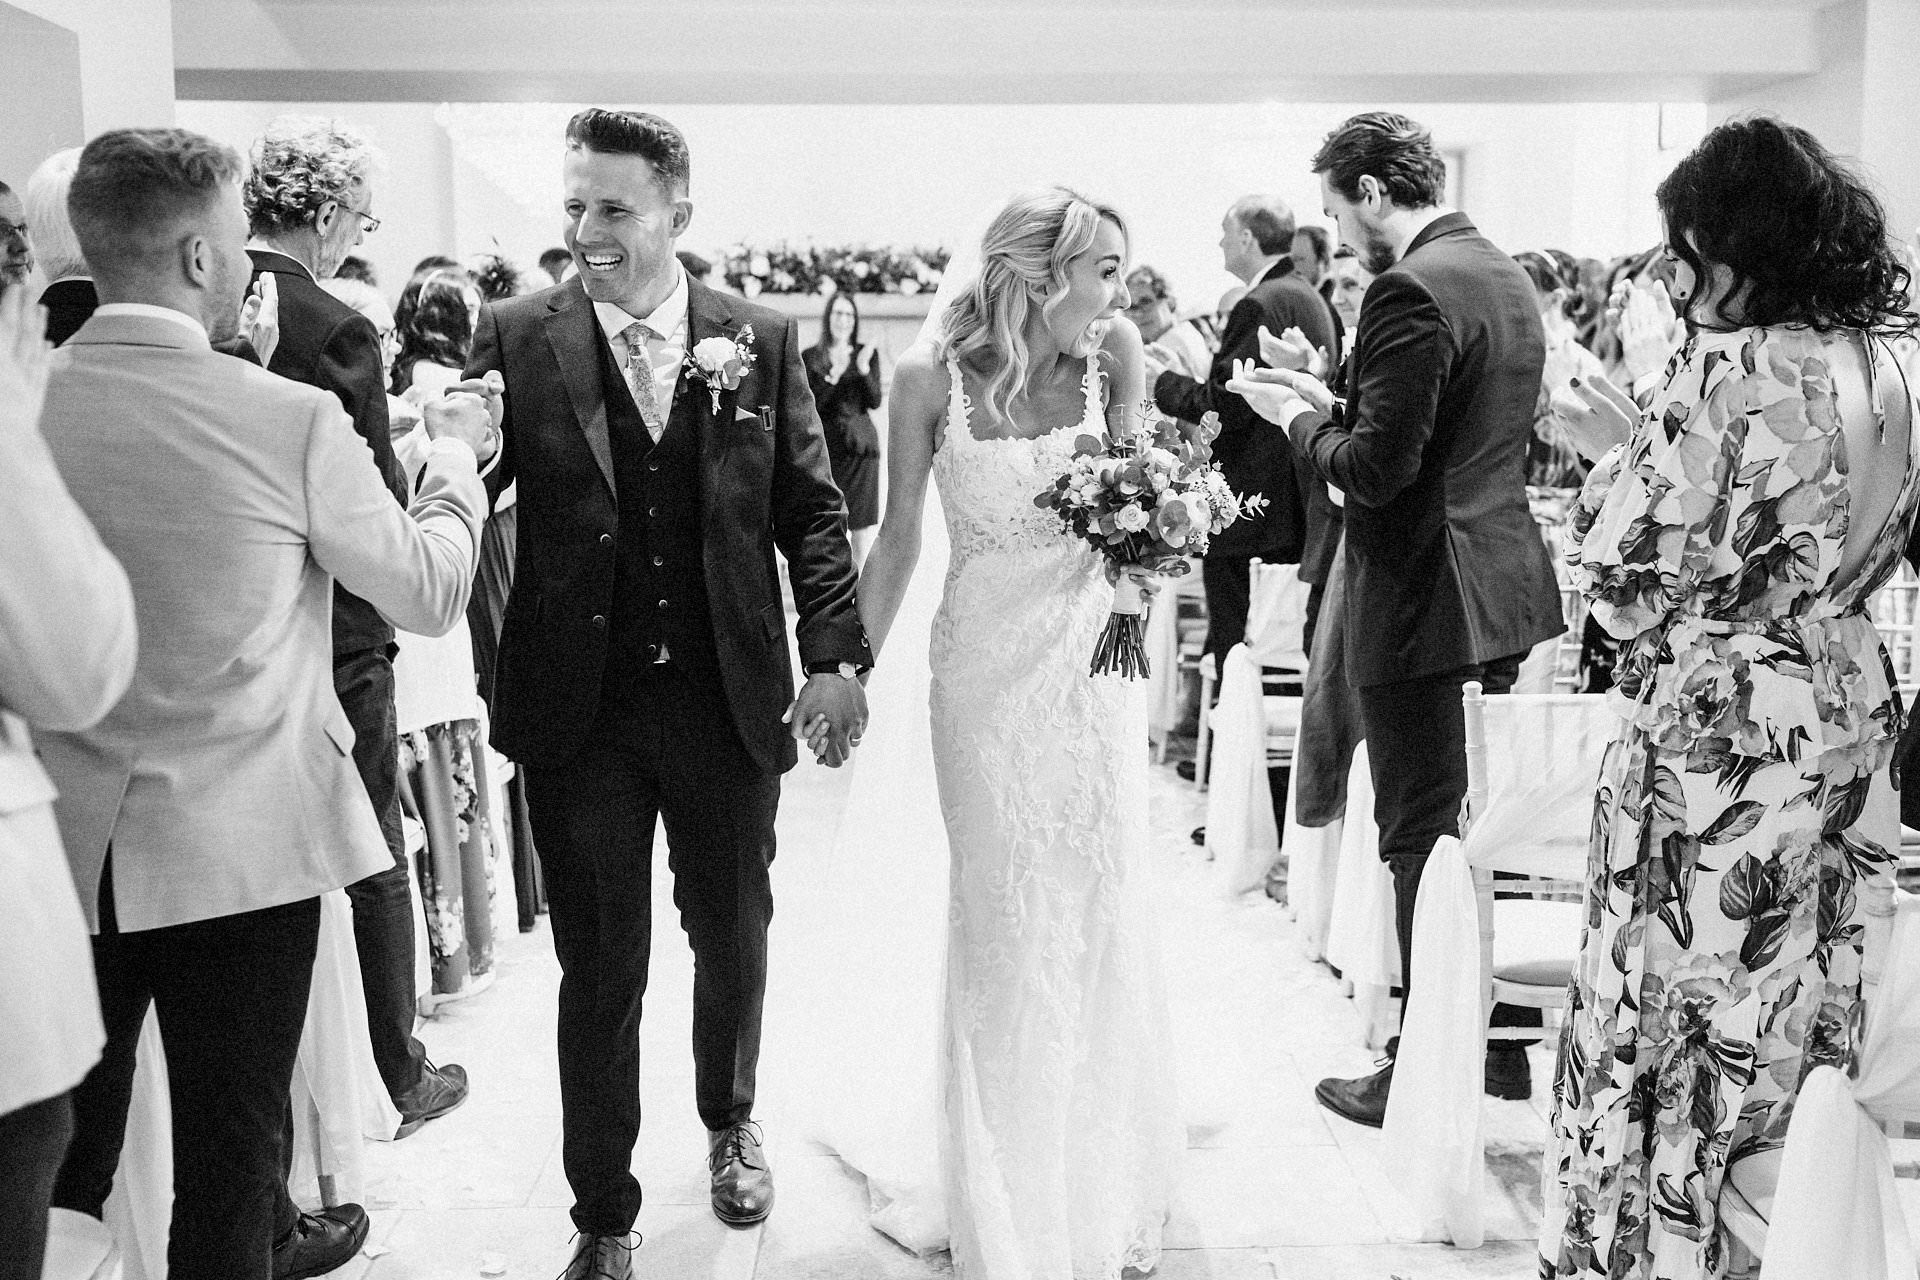 recessional, just married photo in black and white